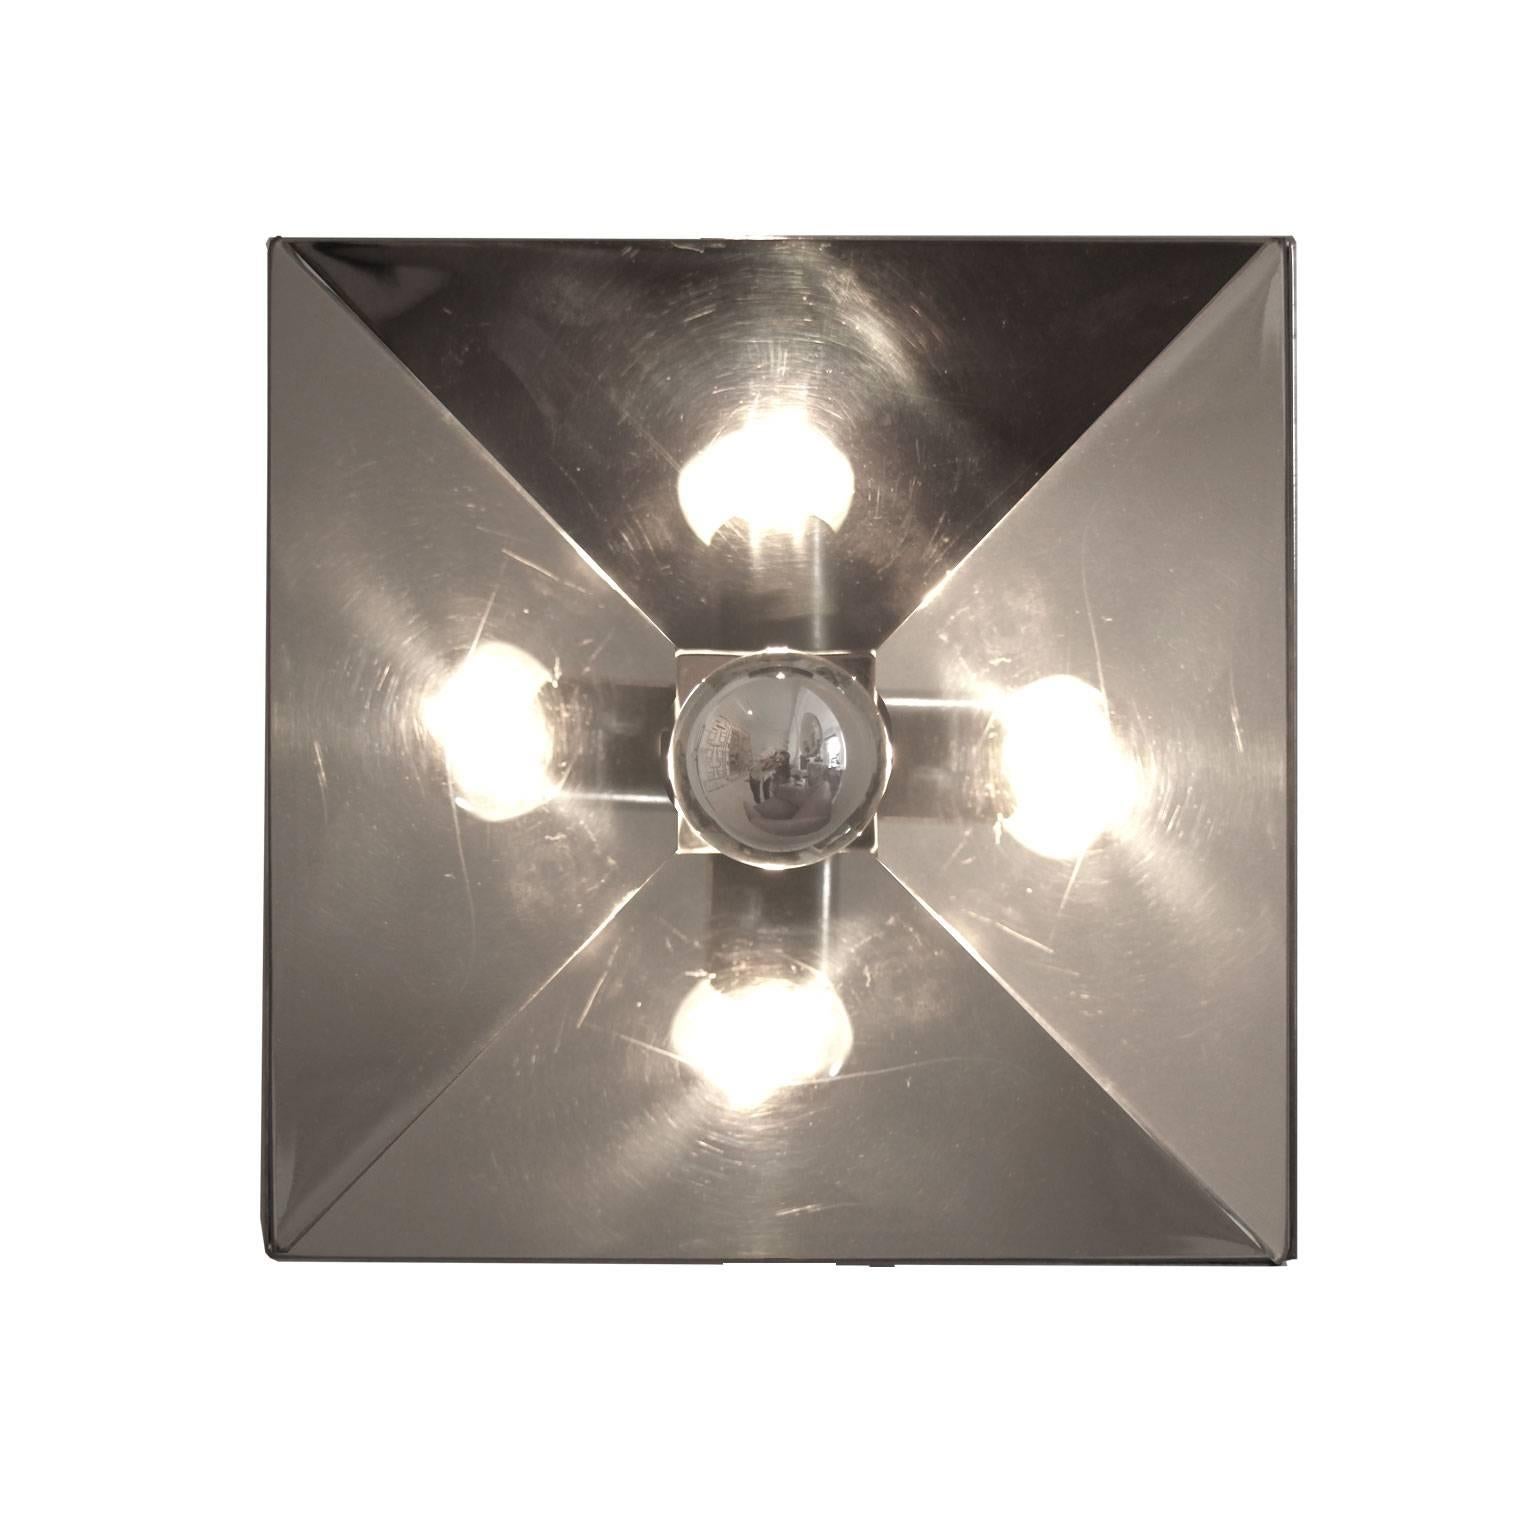 Set of five fall lights in quadrangular shape designed by Gaetano Sciolari. Made in steel with the light point placed in the middle.